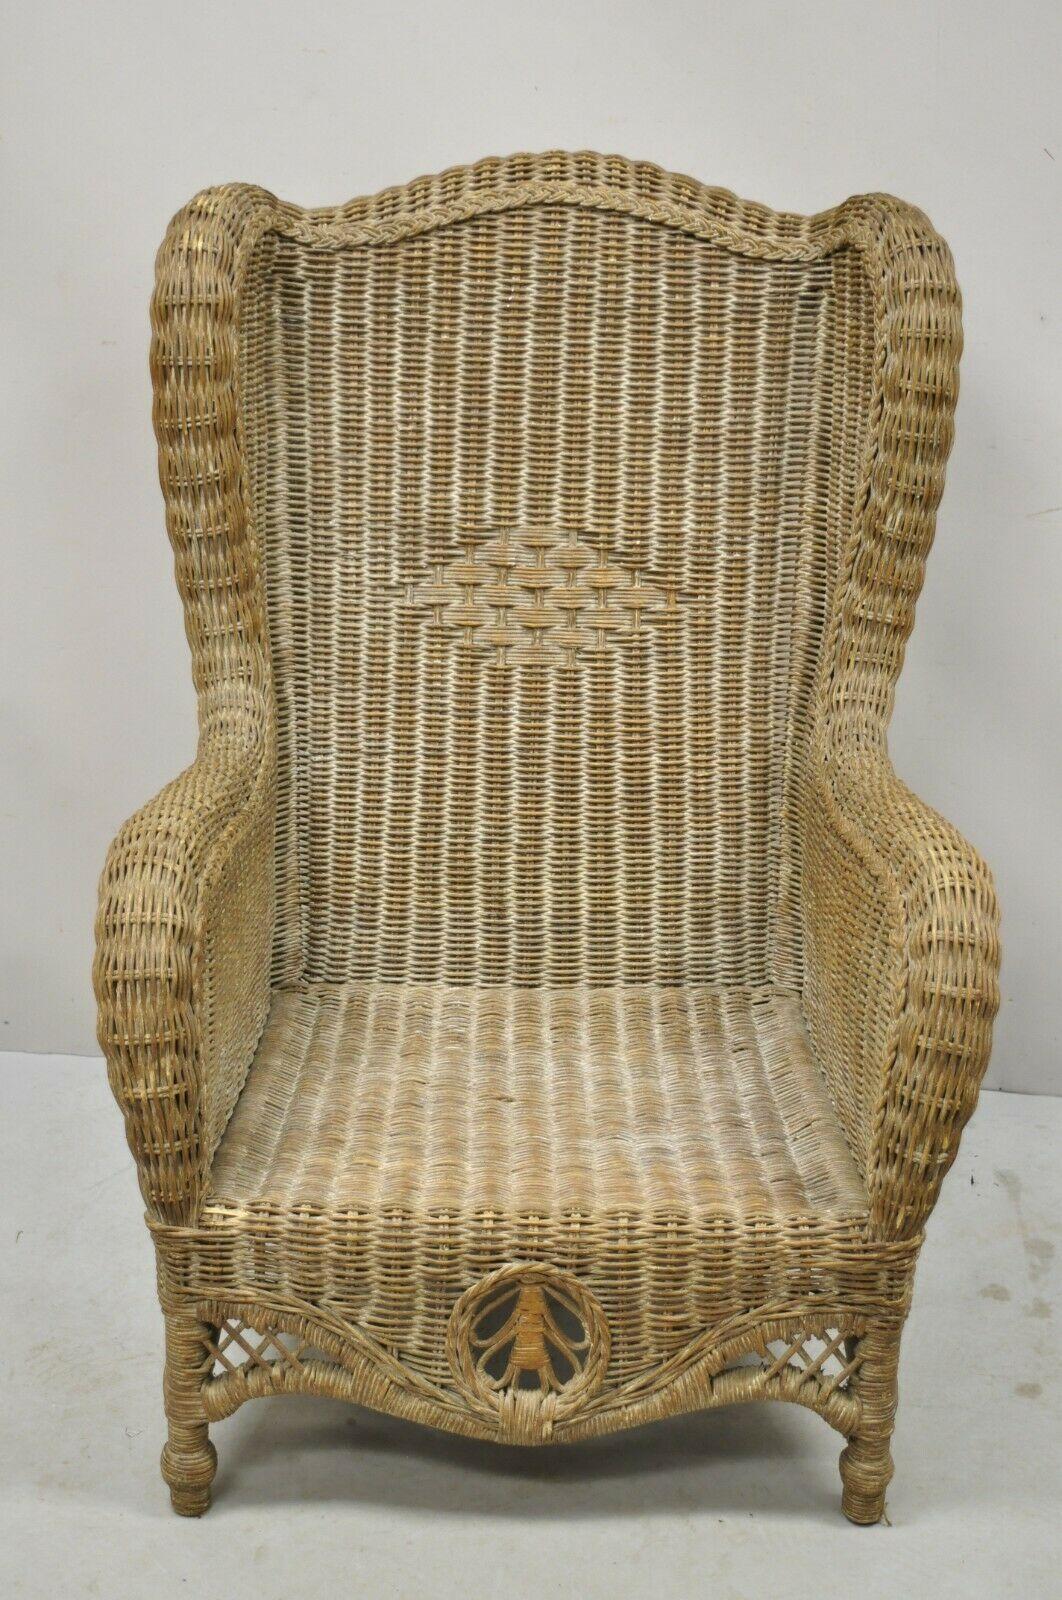 Large Woven Wicker Rattan Victorian Style Wingback Lounge Arm Chair. item features a large Impressive size, woven wicker frame, wingback design, quality craftsmanship, great style and form. Circa Late 20th Century. Measurements: 44